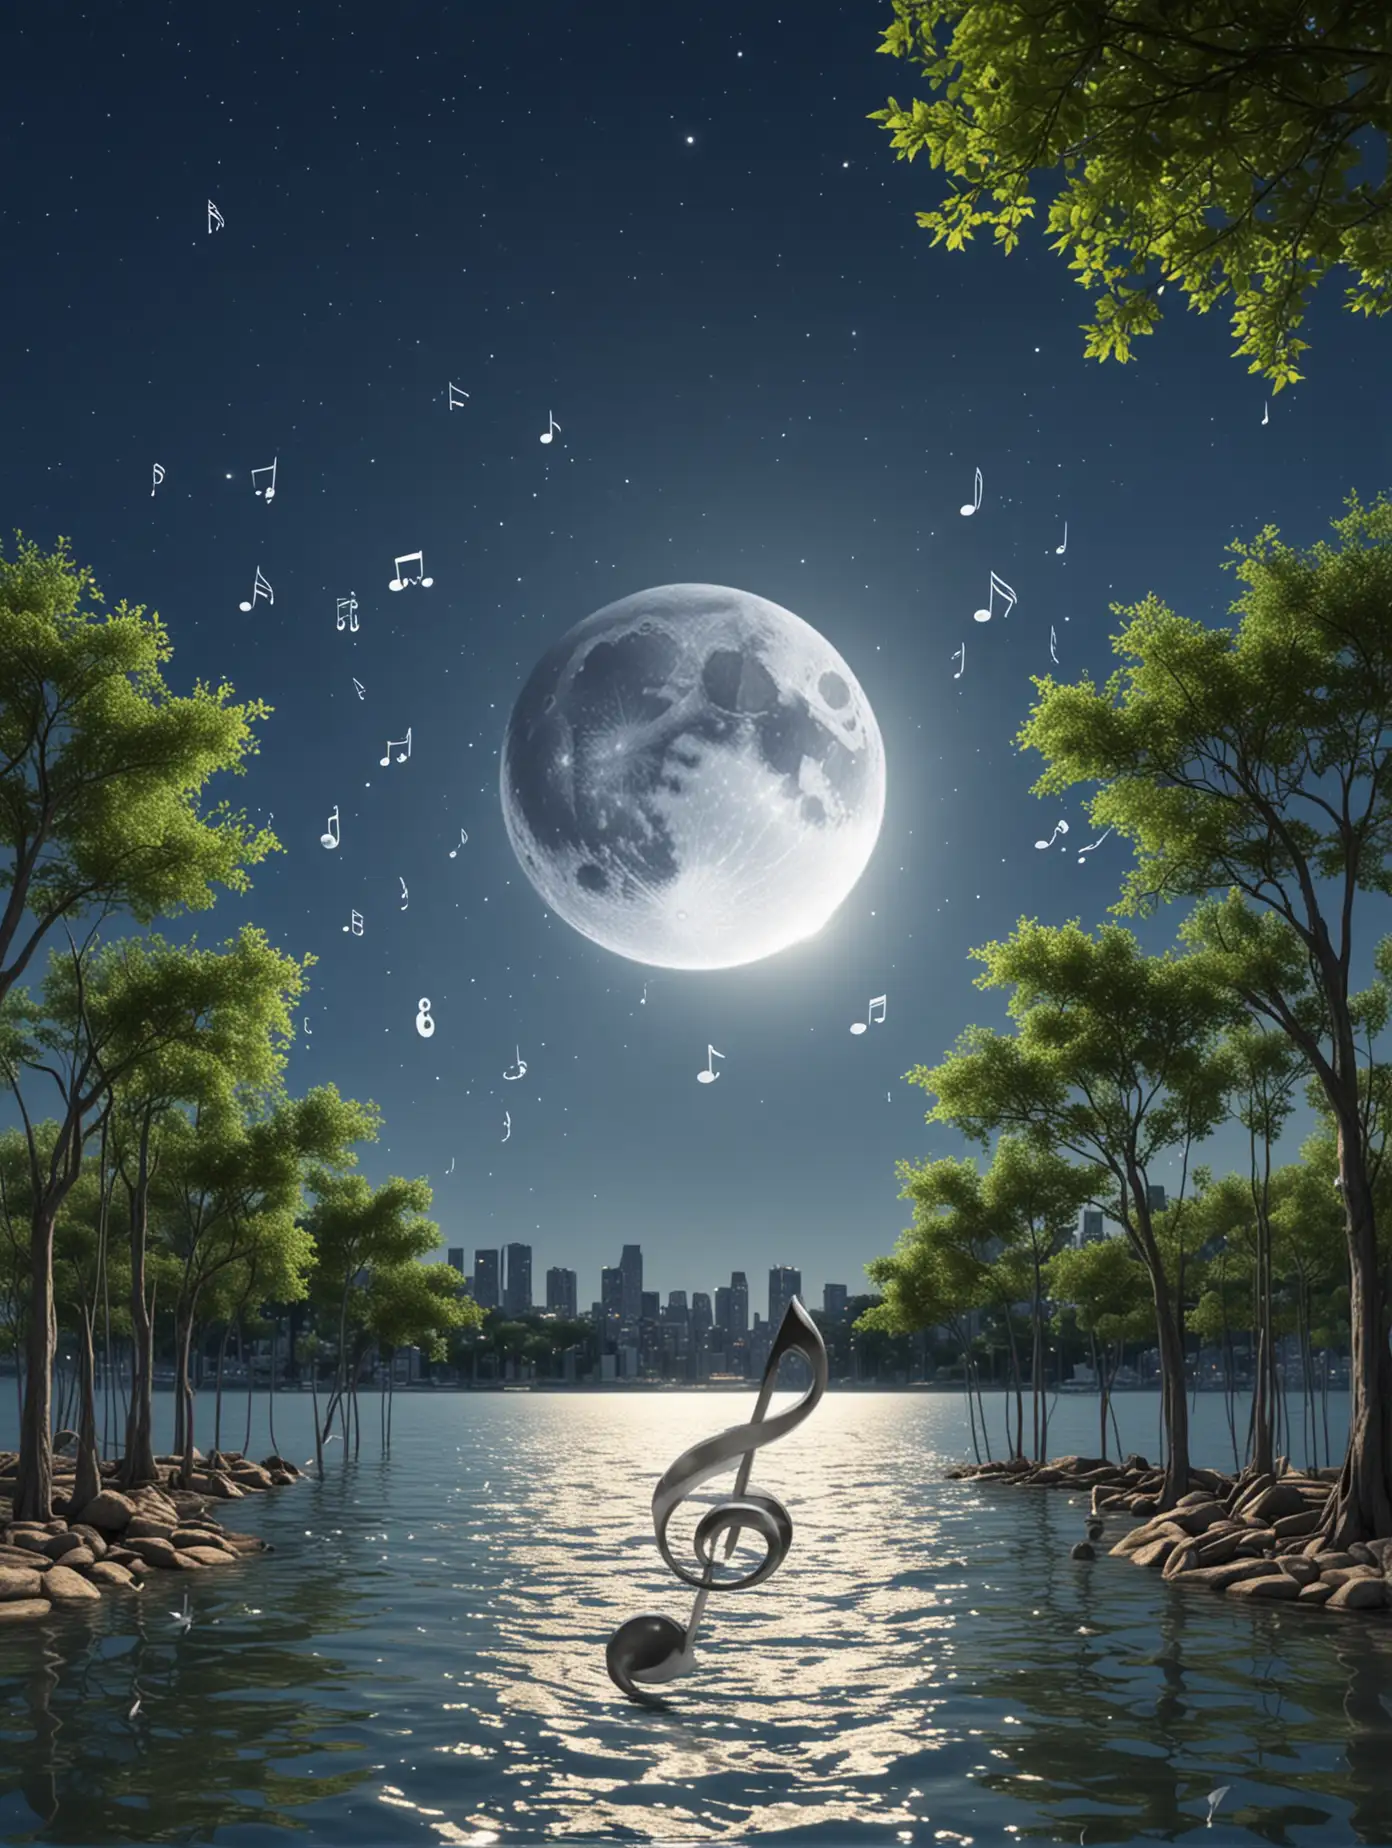 Moon, musical notes twinkling, city in the sea, clear sky and trees background during the day